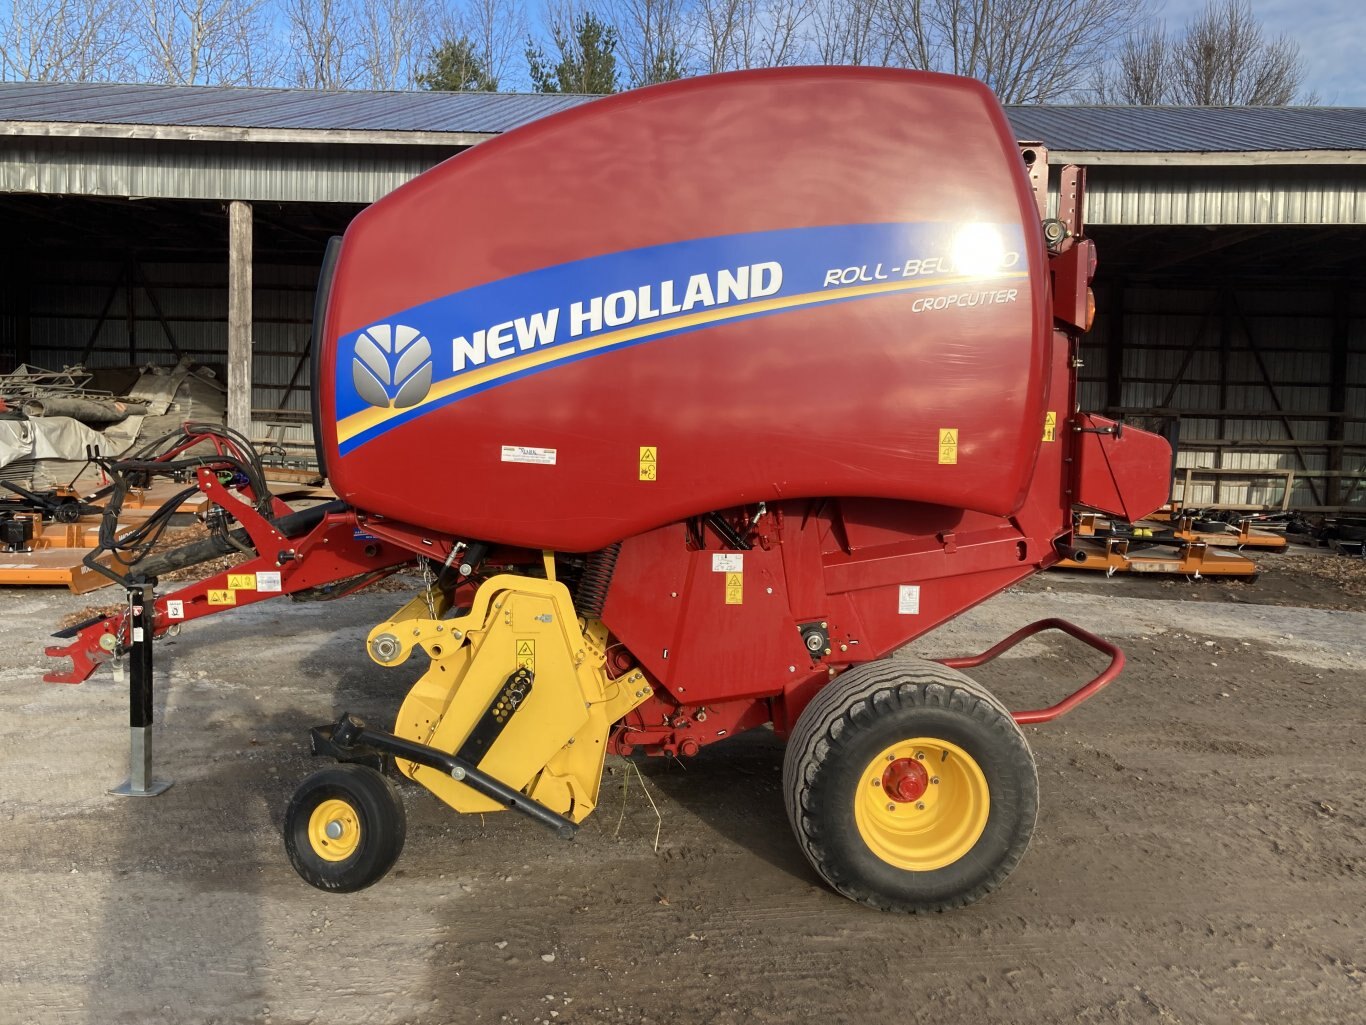 2018 New Holland 450 Rotocut